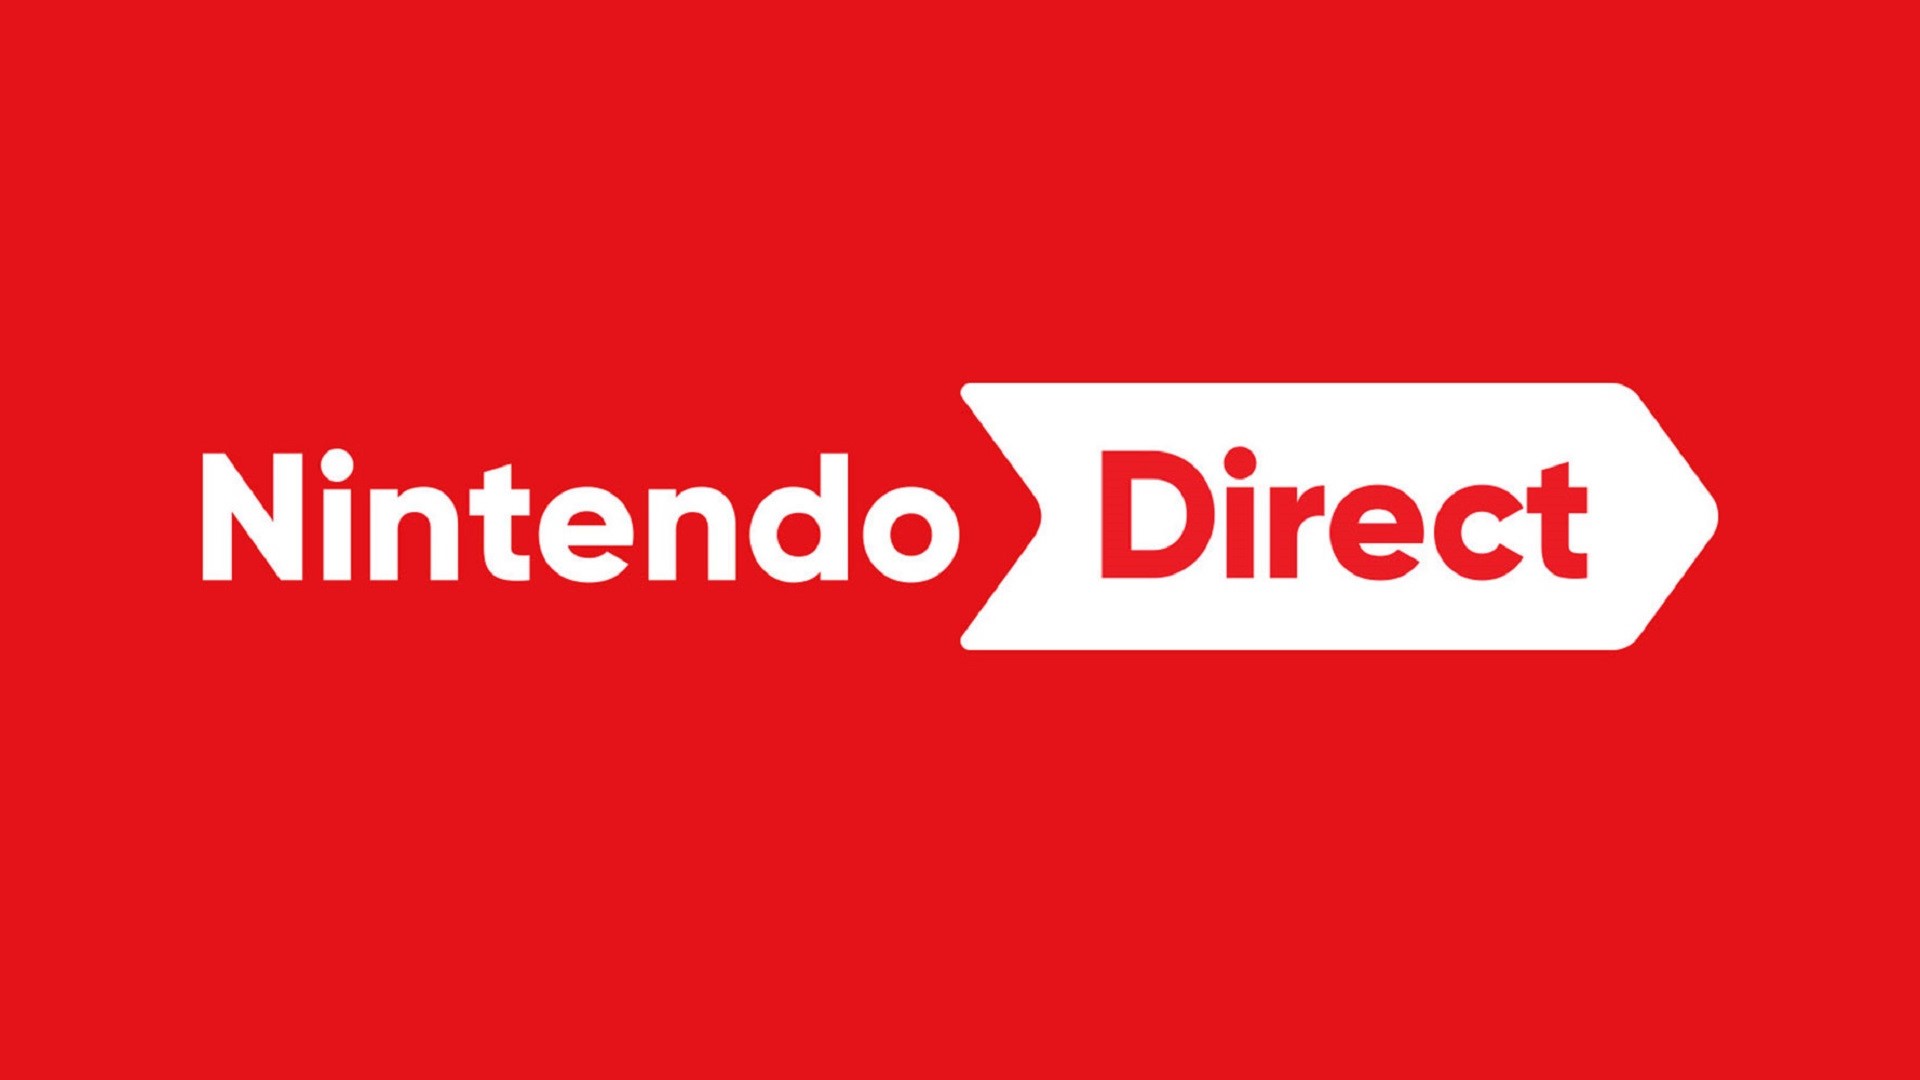 Nintendo Direct Still Scheduled for September, Another Leaker Claims